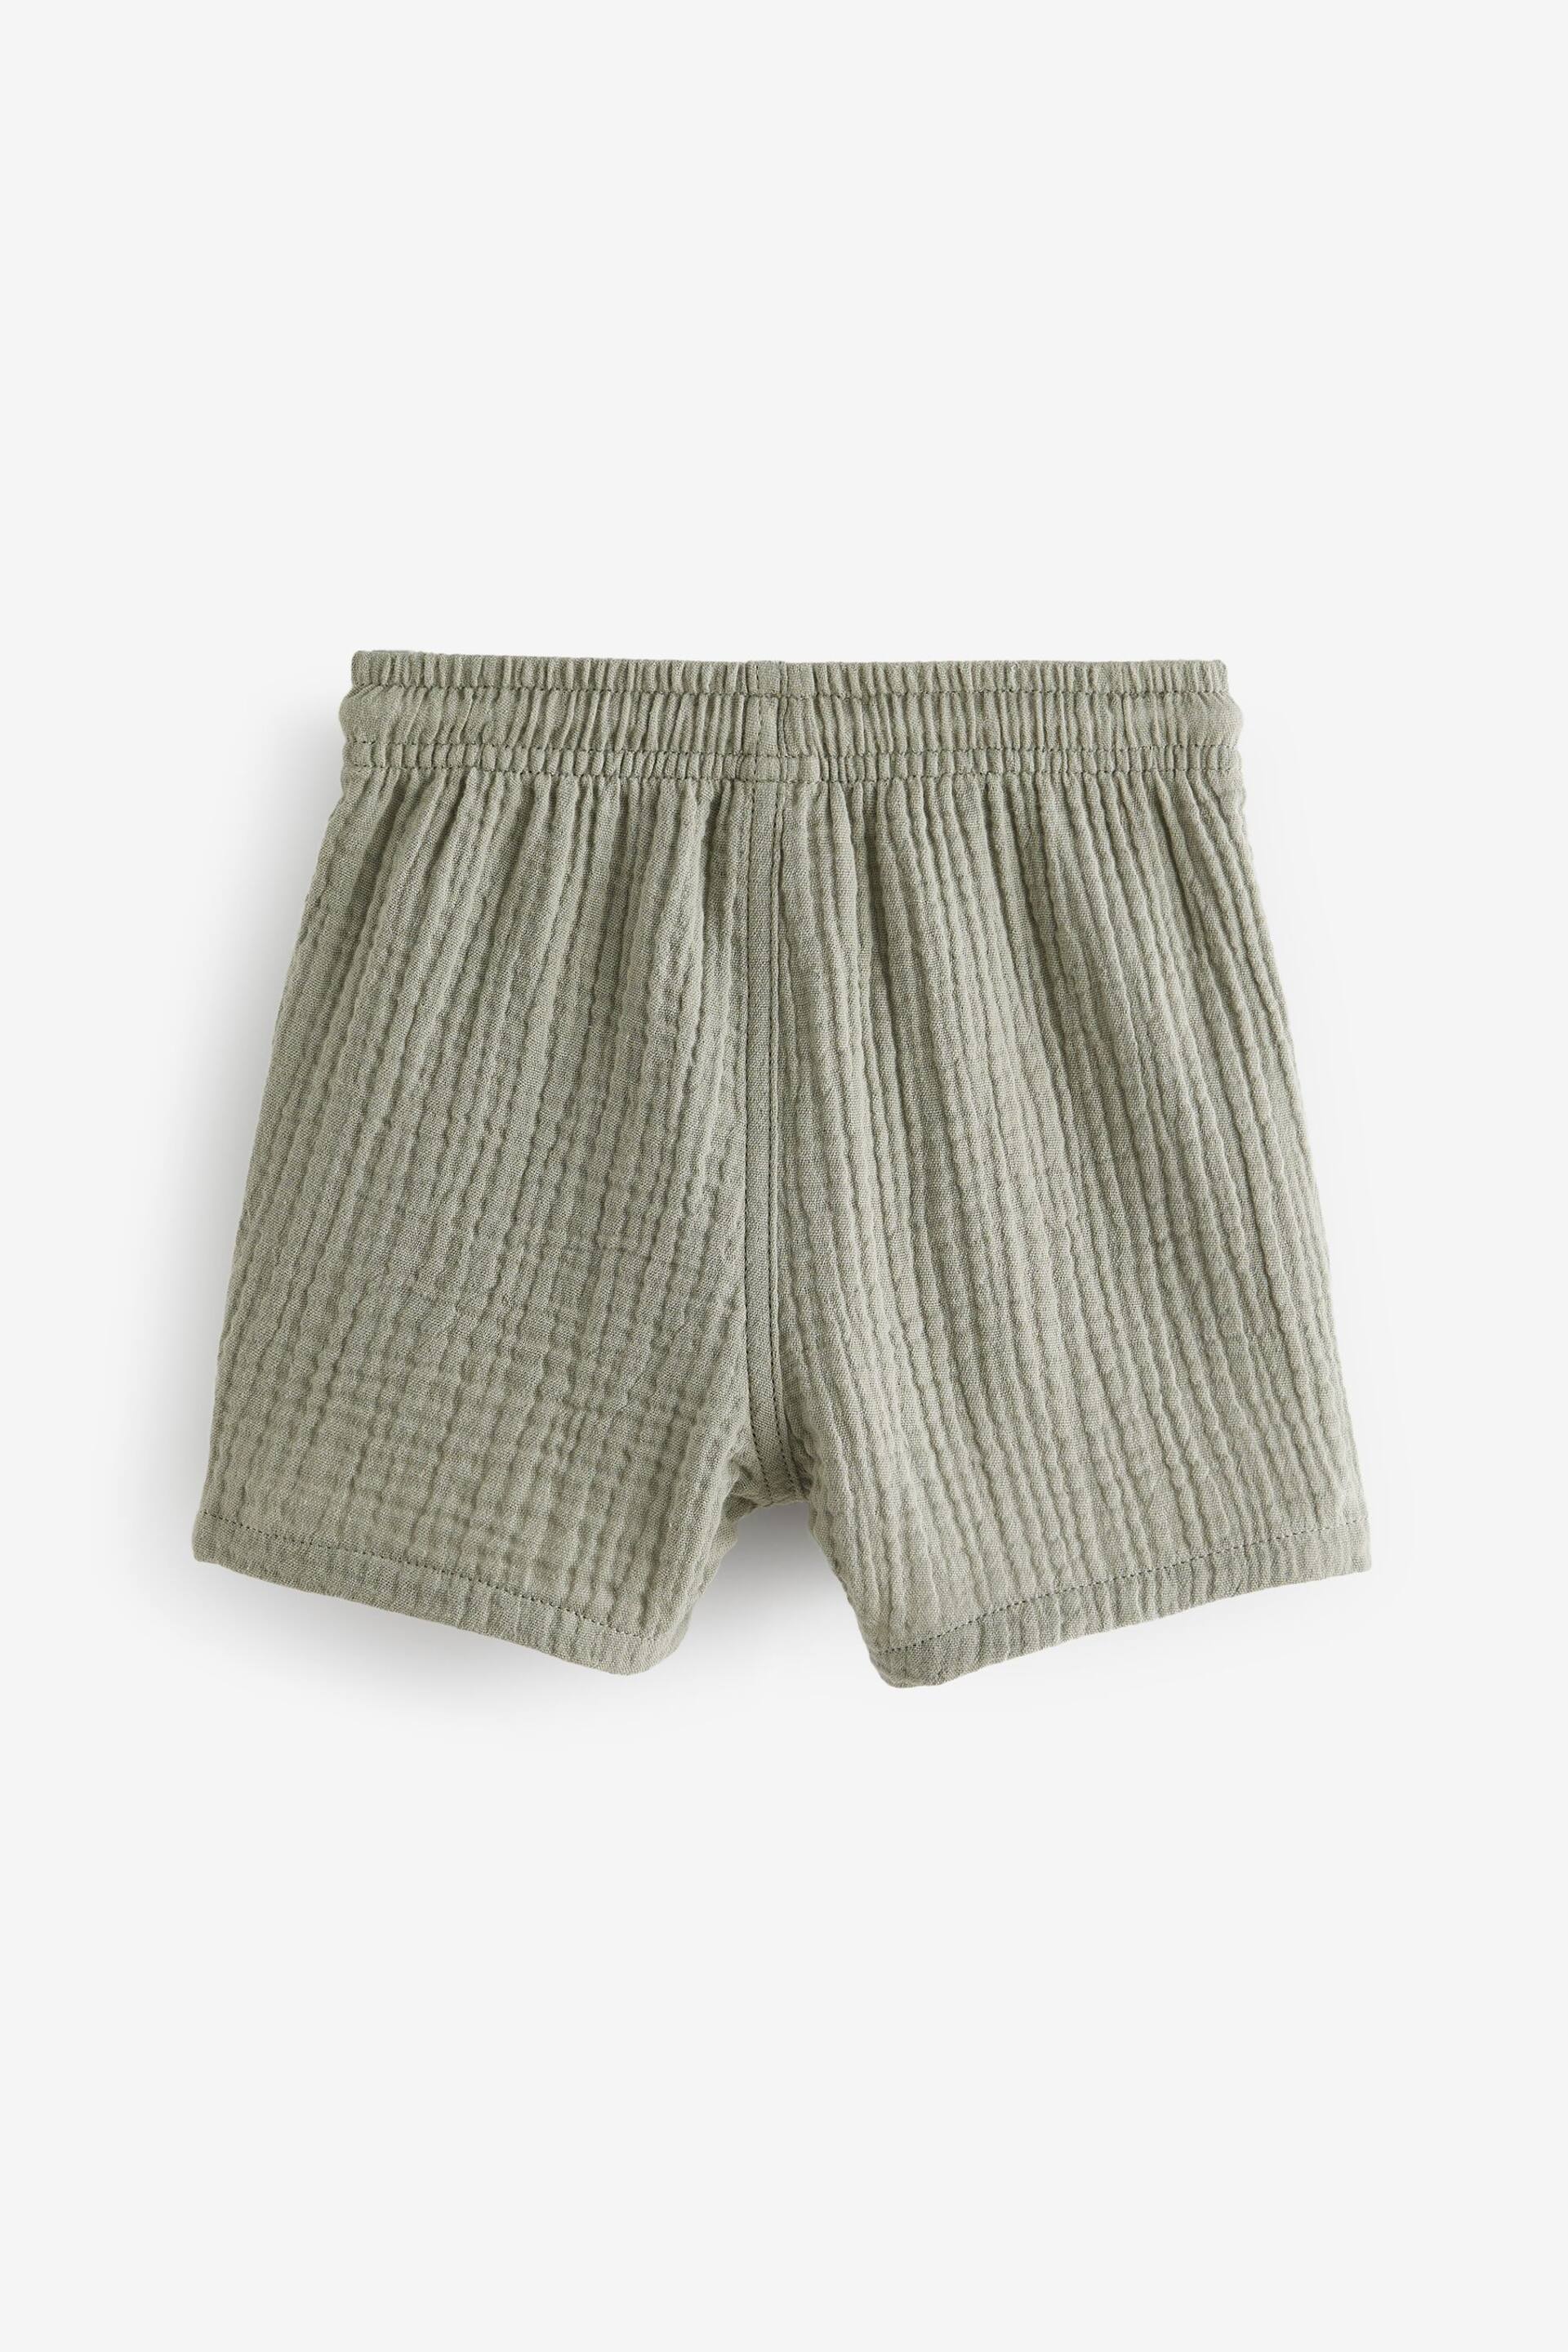 Sage Green Soft Textured Cotton Shorts (3mths-7yrs) - Image 6 of 7